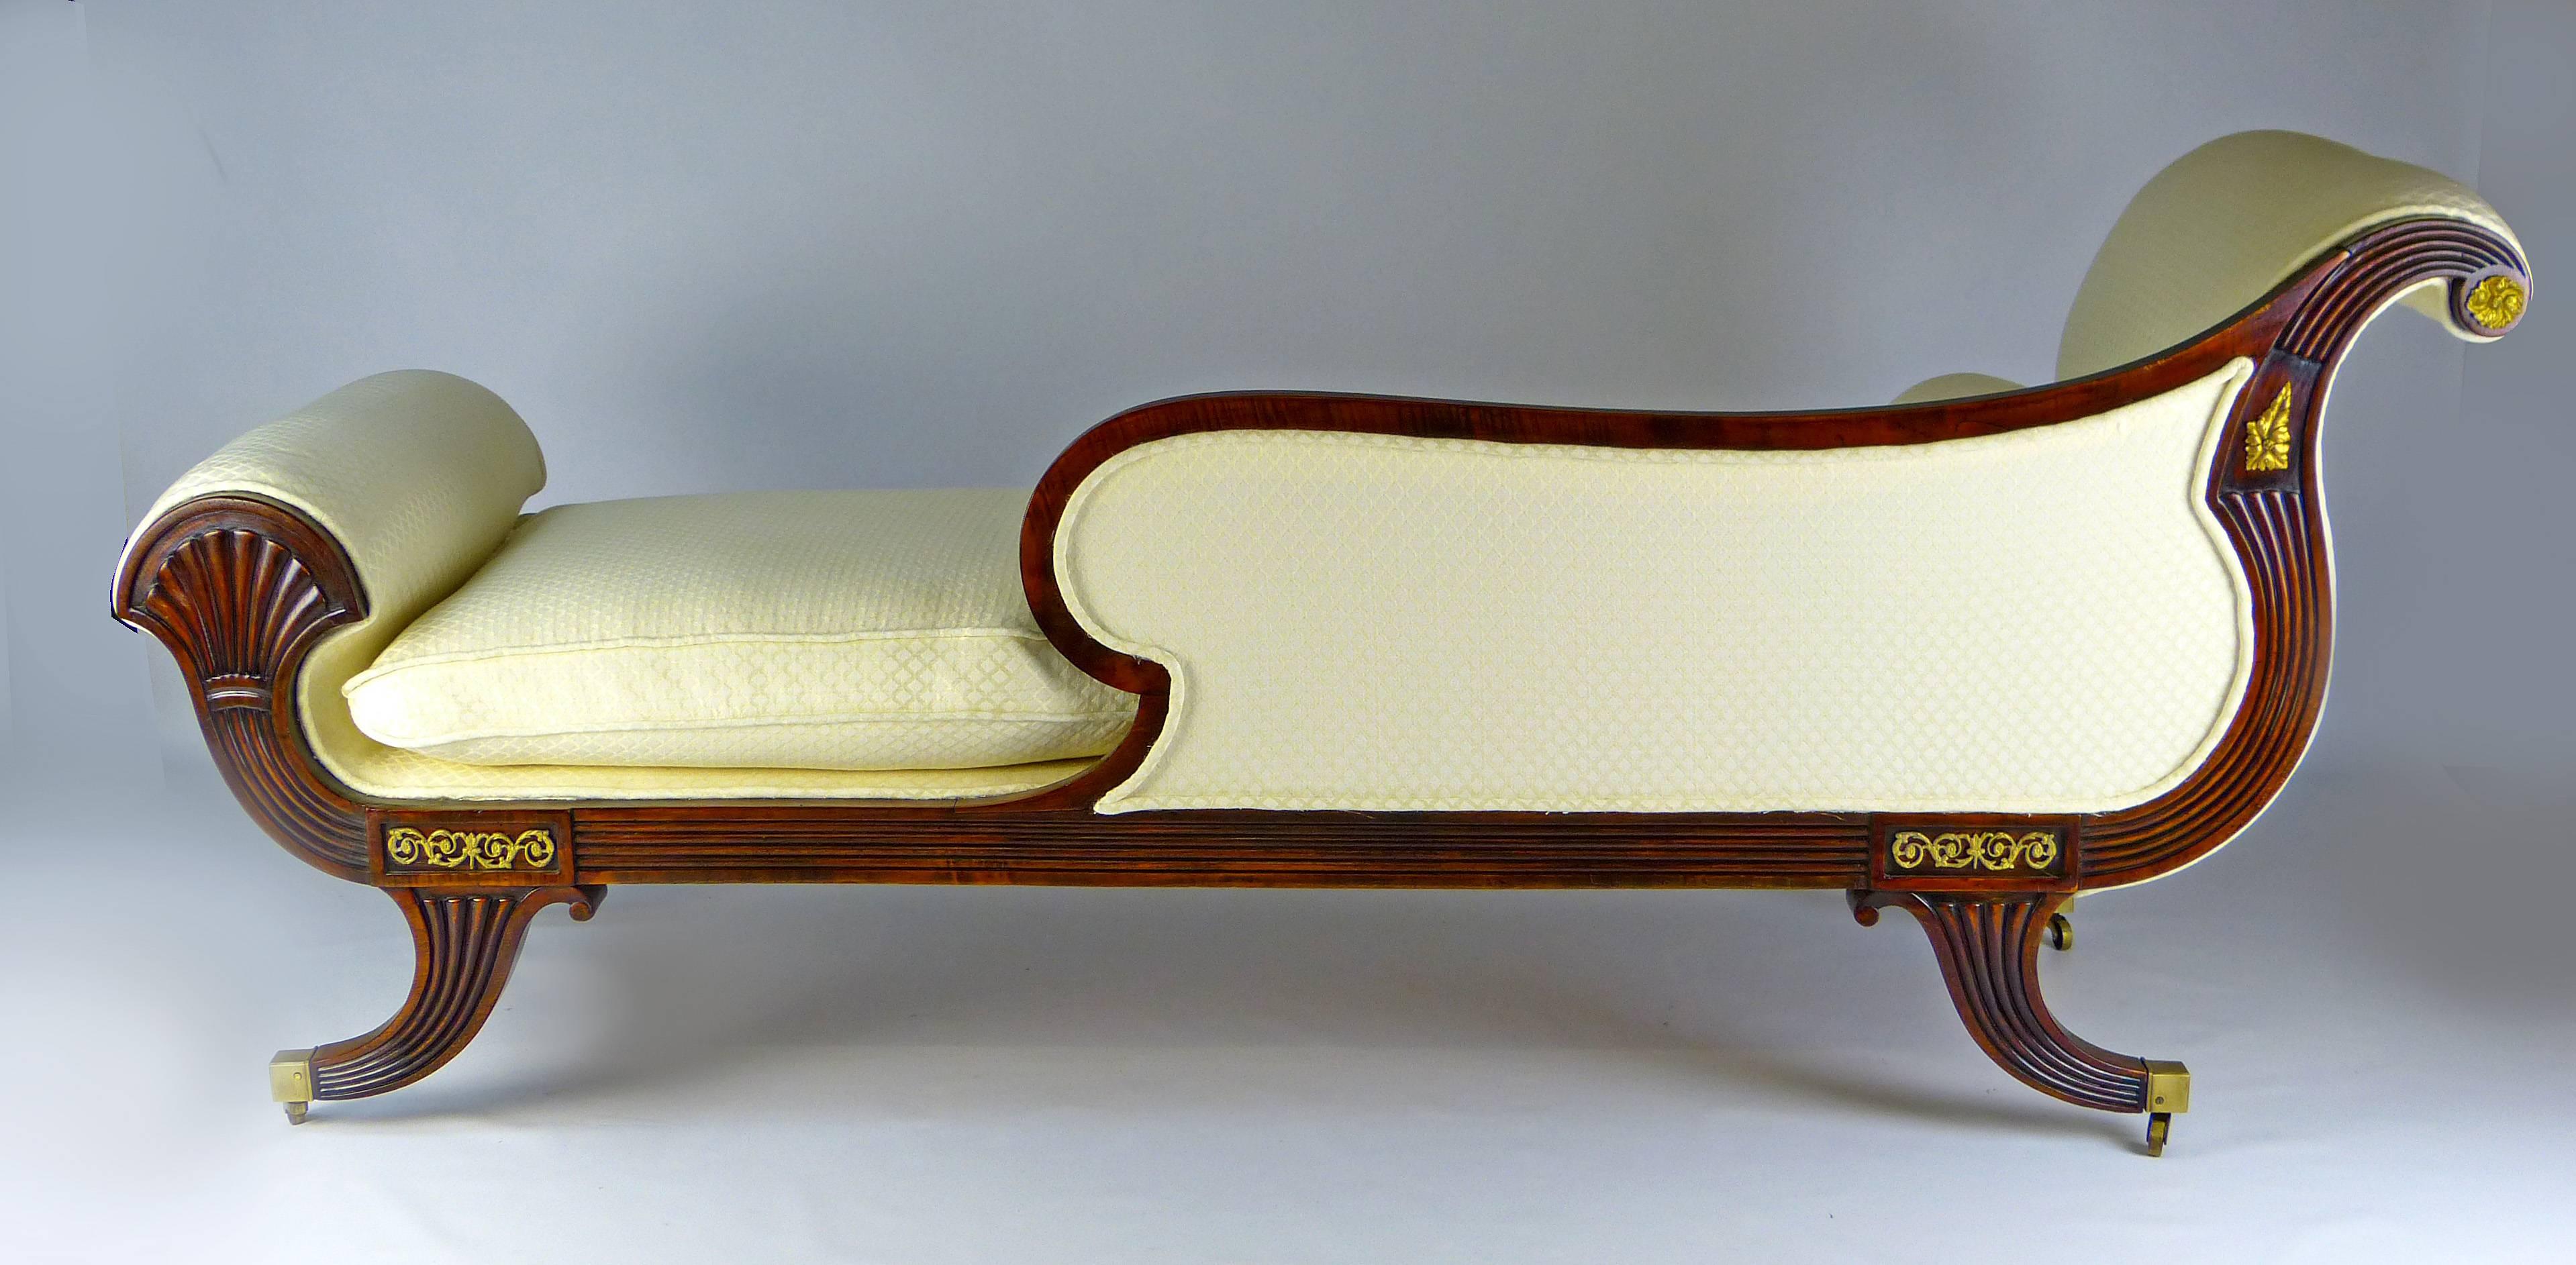 Federal Chaise Long or Daybed Early 19th Century American - RETIREMENT SALE